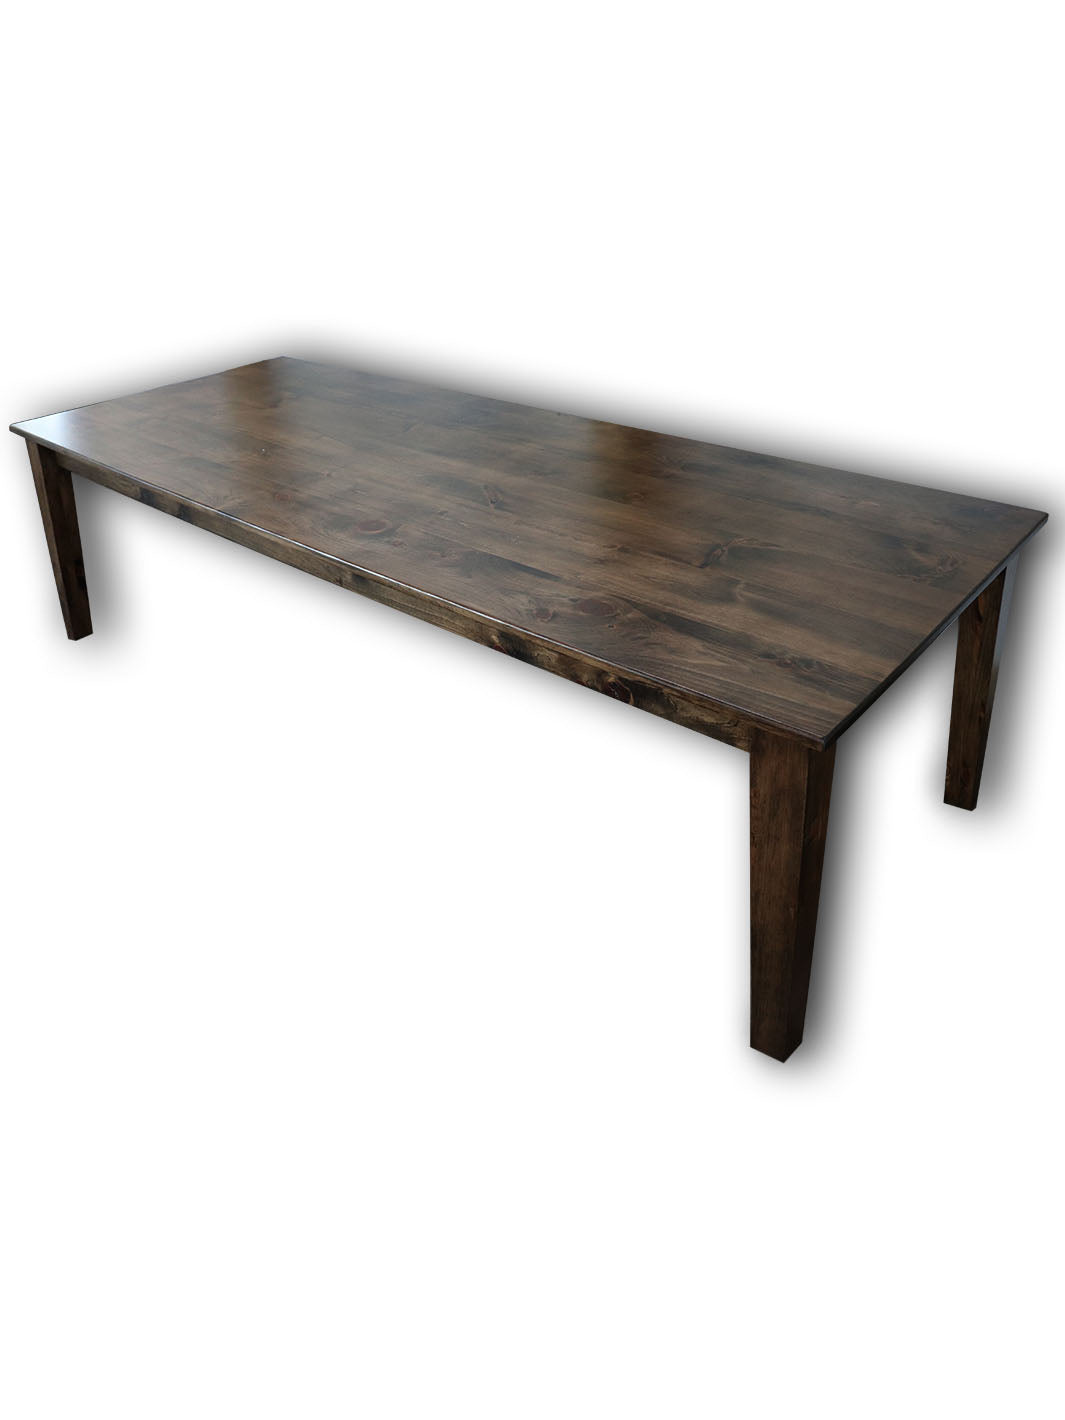 Earthly Comfort Large Pine Stained Shaker Dining Table Earthly Comfort Dining Tables 2025